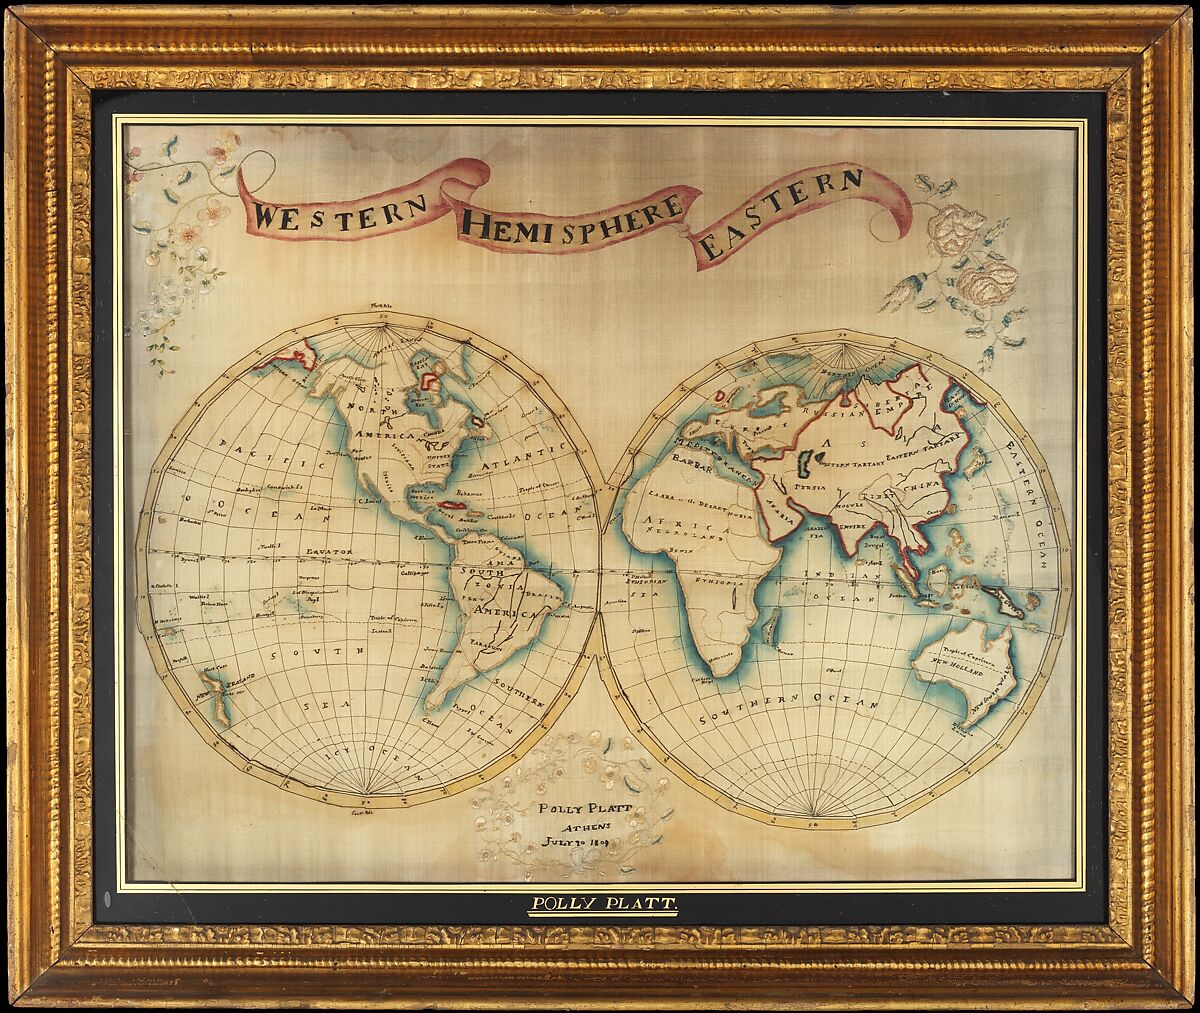 Map sampler made at Pleasent Valley Quaker Boarding School, Polly Platt (American, born Athens, New York, 1795), Silk and chenille embroidery on silk, American 